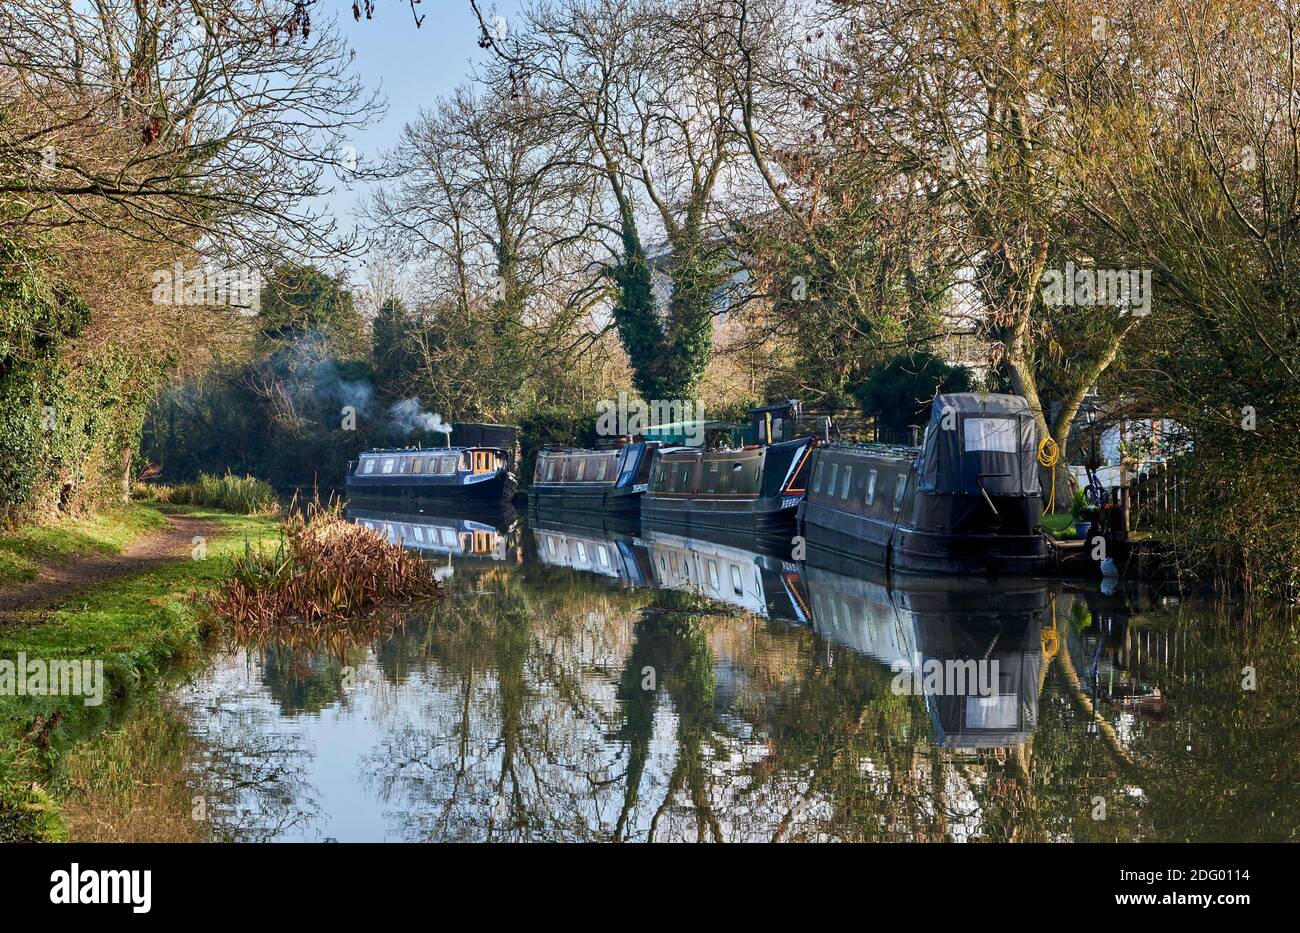 Canal boats moored up, early morning in Autumn on the Ashby Canal, Hinckley, Leicestershire, East Midlands, UK Stock Photo